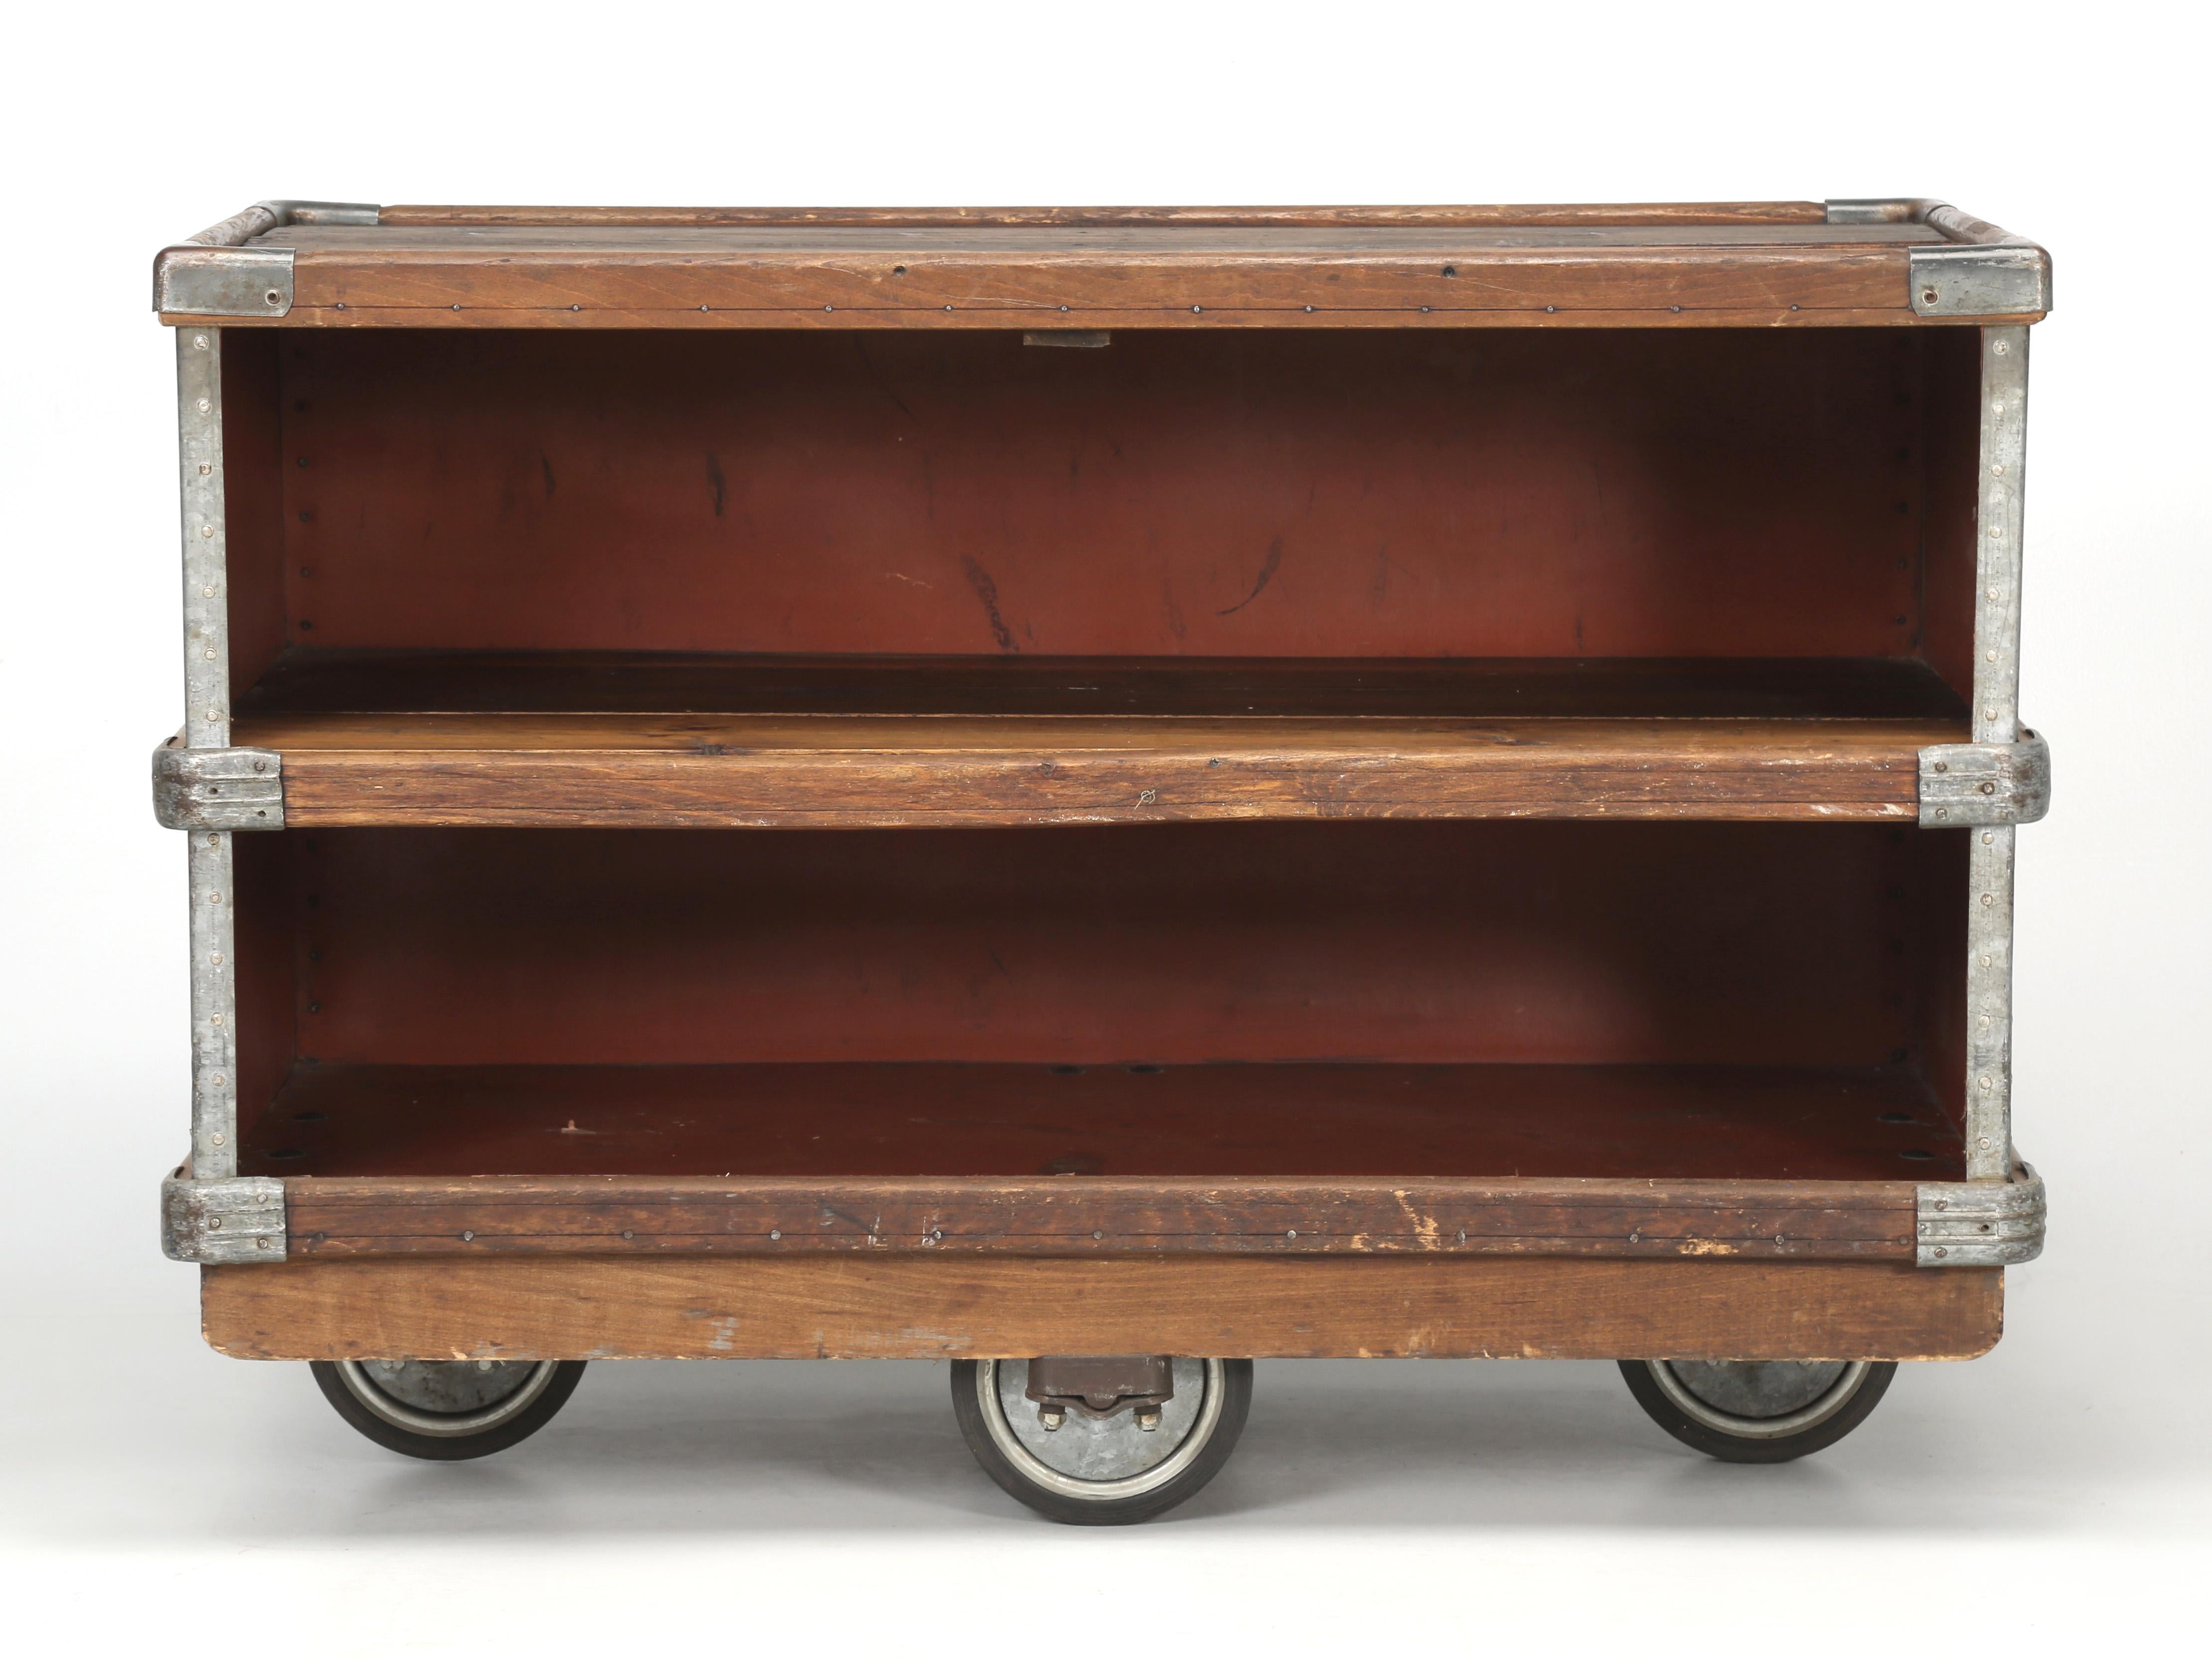 1920’s-1940’s original Suroy Industrial mobile storage and work surface on wheels. By 1853 the industrial textile revolution arrived in Loos, France with the creation of the Esquermes factory. Alfred Thiriez formed a factory that made cotton thread